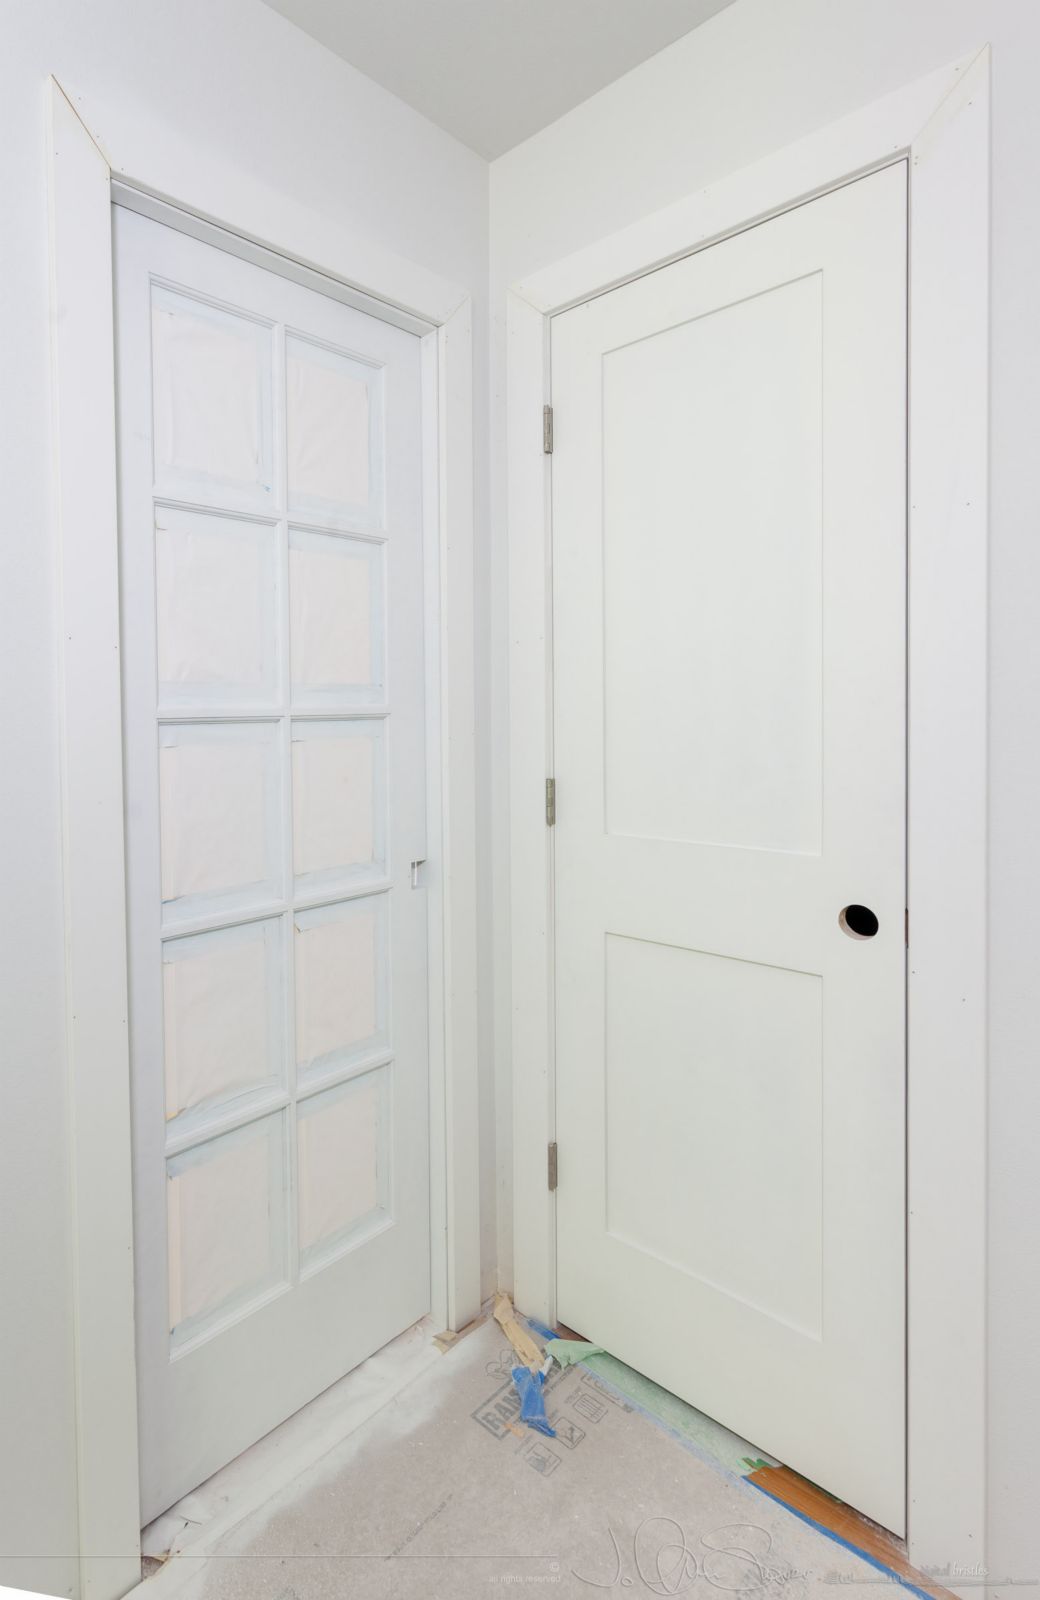 Shaker style door for pantry. June 19th.